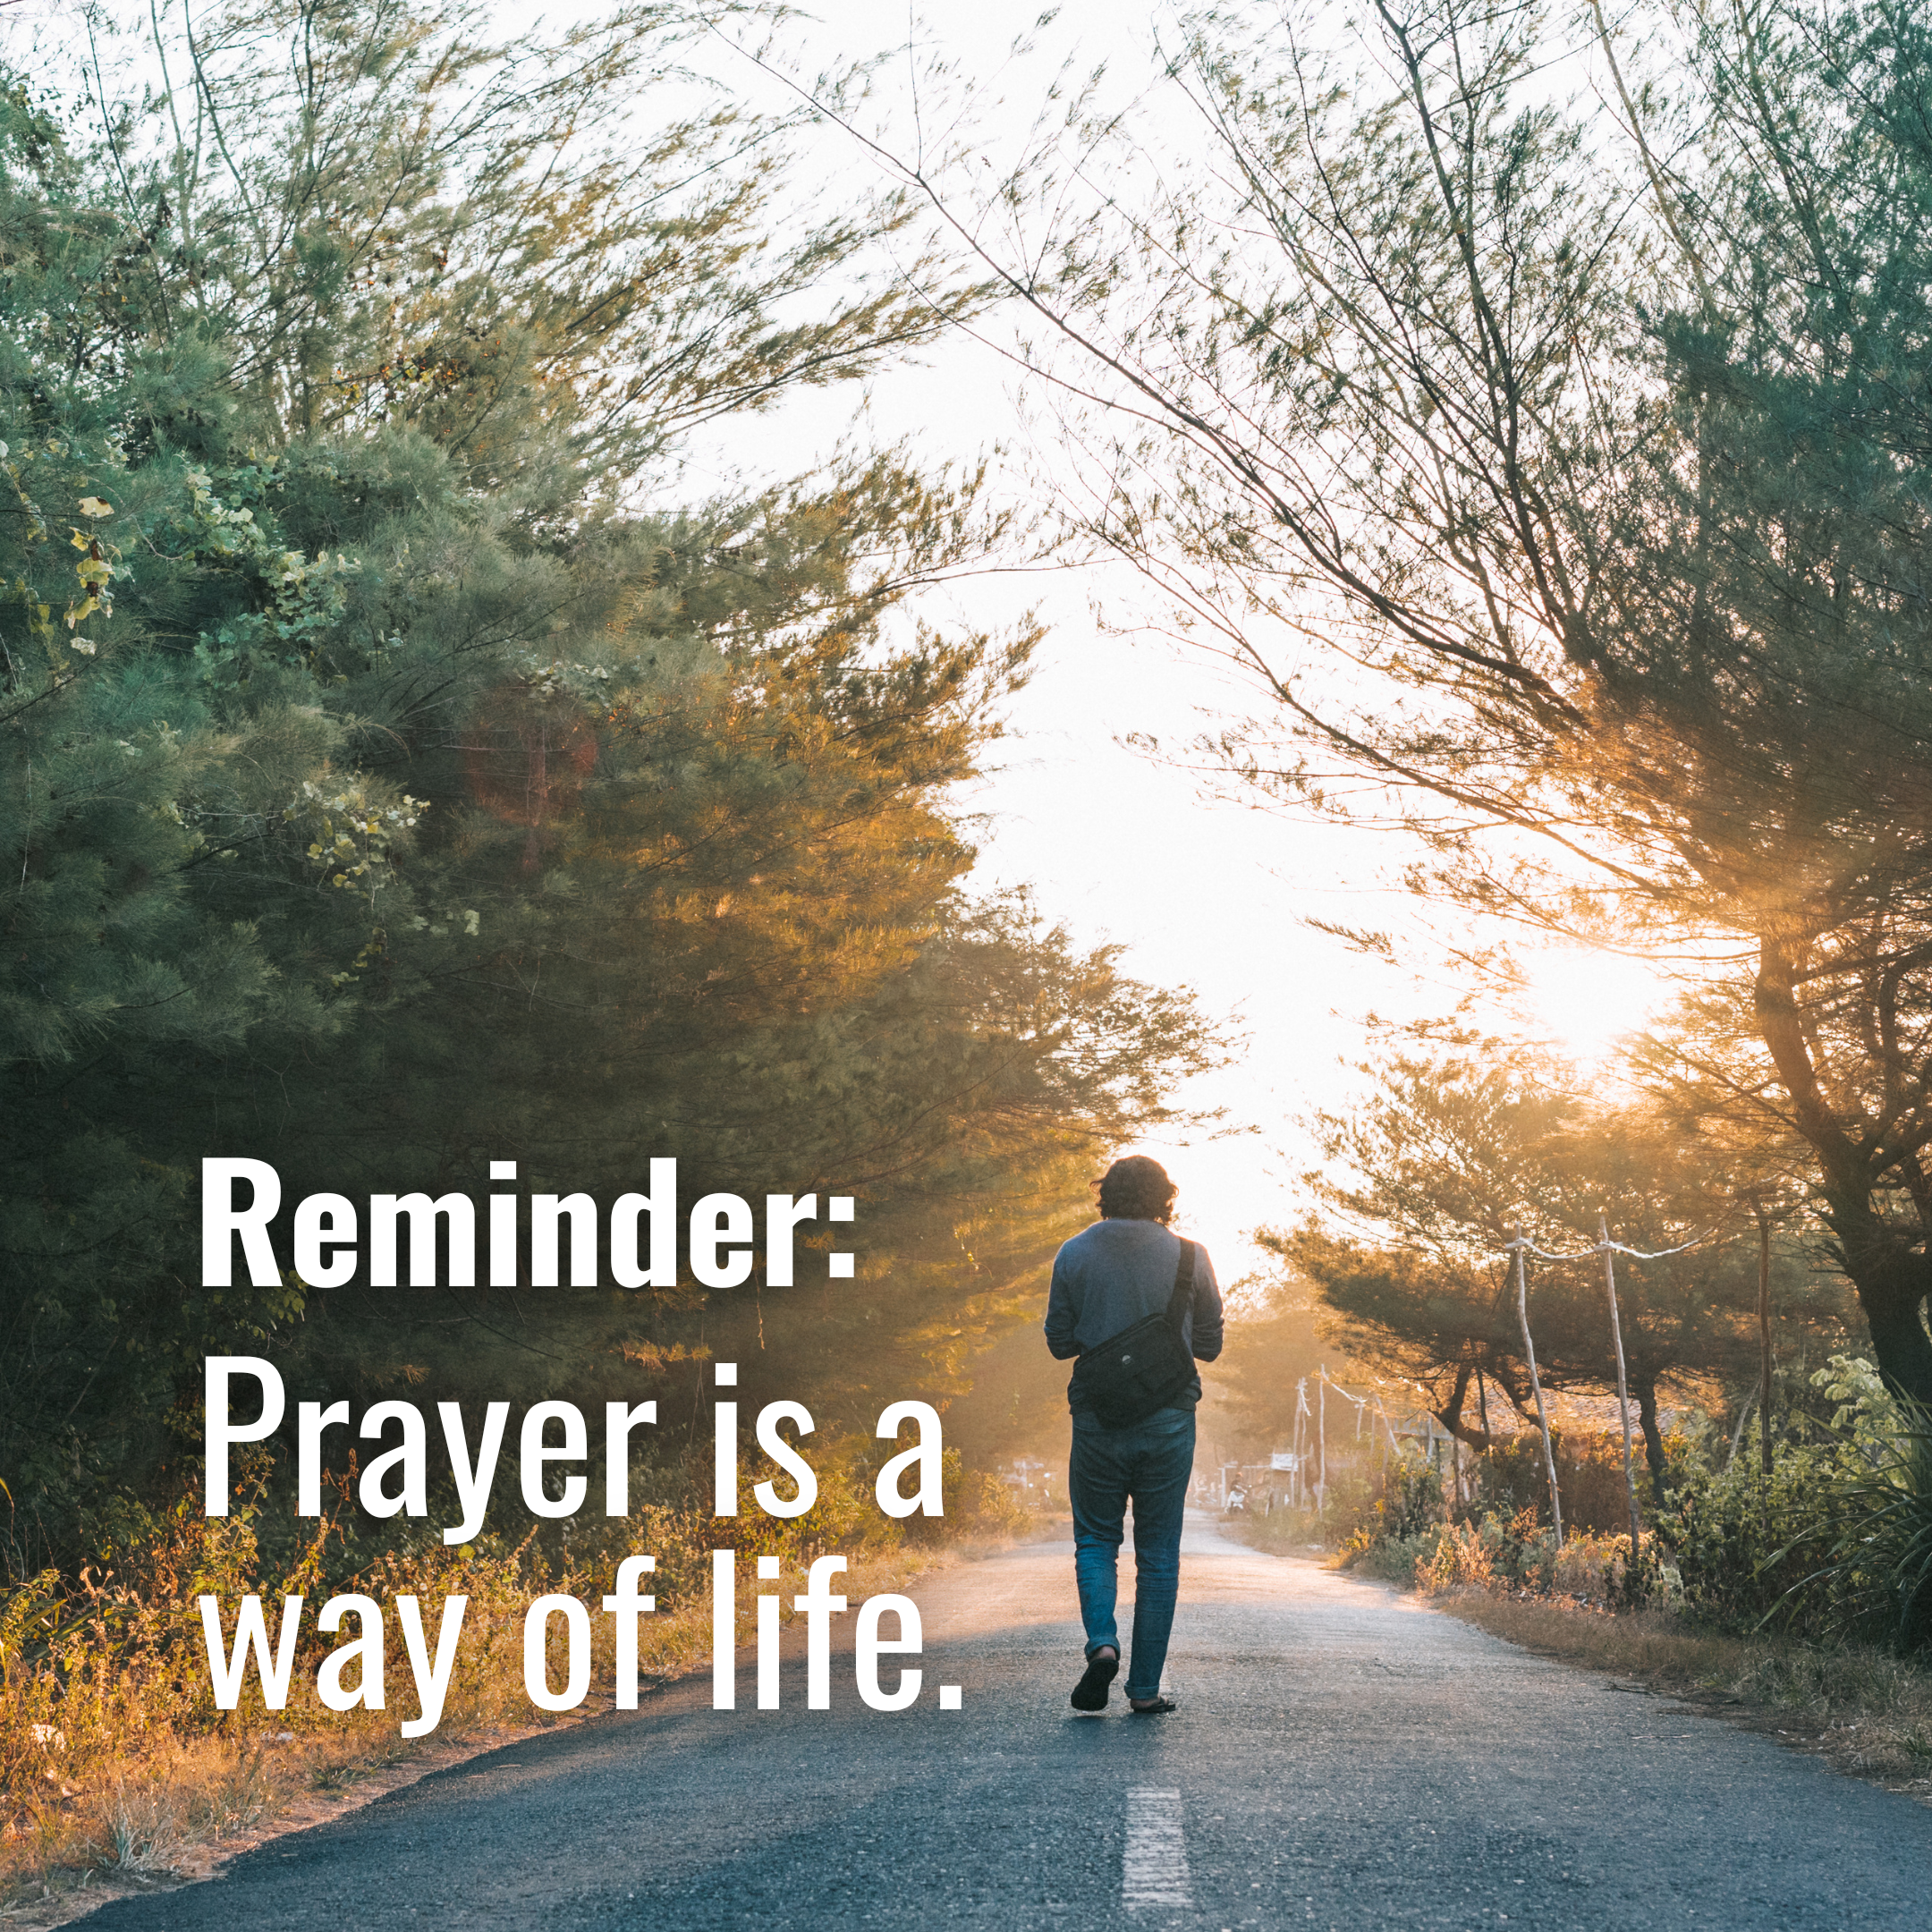 Prayer is a way of life. 🙏